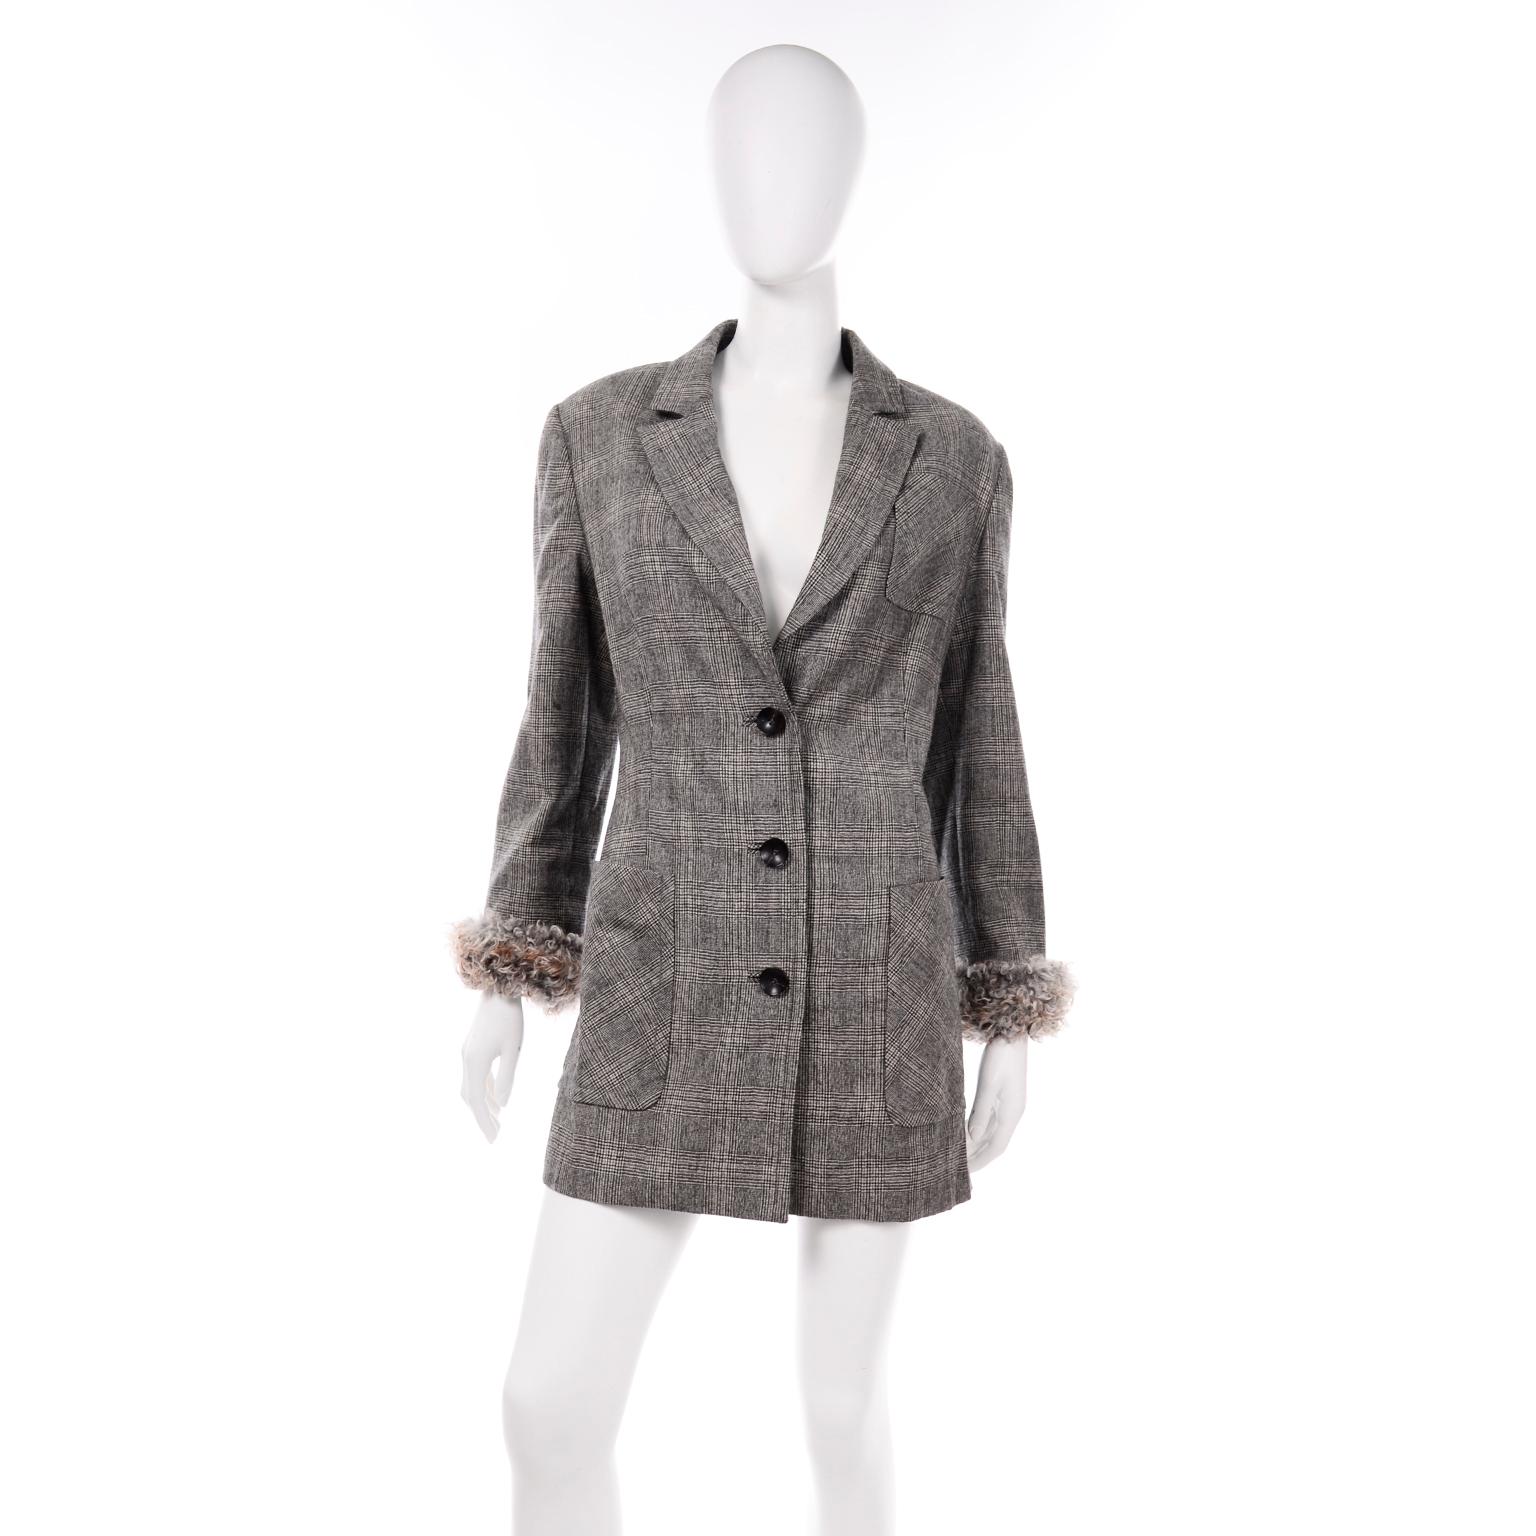 This Gianfranco Ferre grey plaid wool longline blazer jacket will make a great Fall and Winter staple! The plaid wool fabric is black, grey, white, and light brown. There are 2 functional patch pockets with a patch breast pocket and there is a